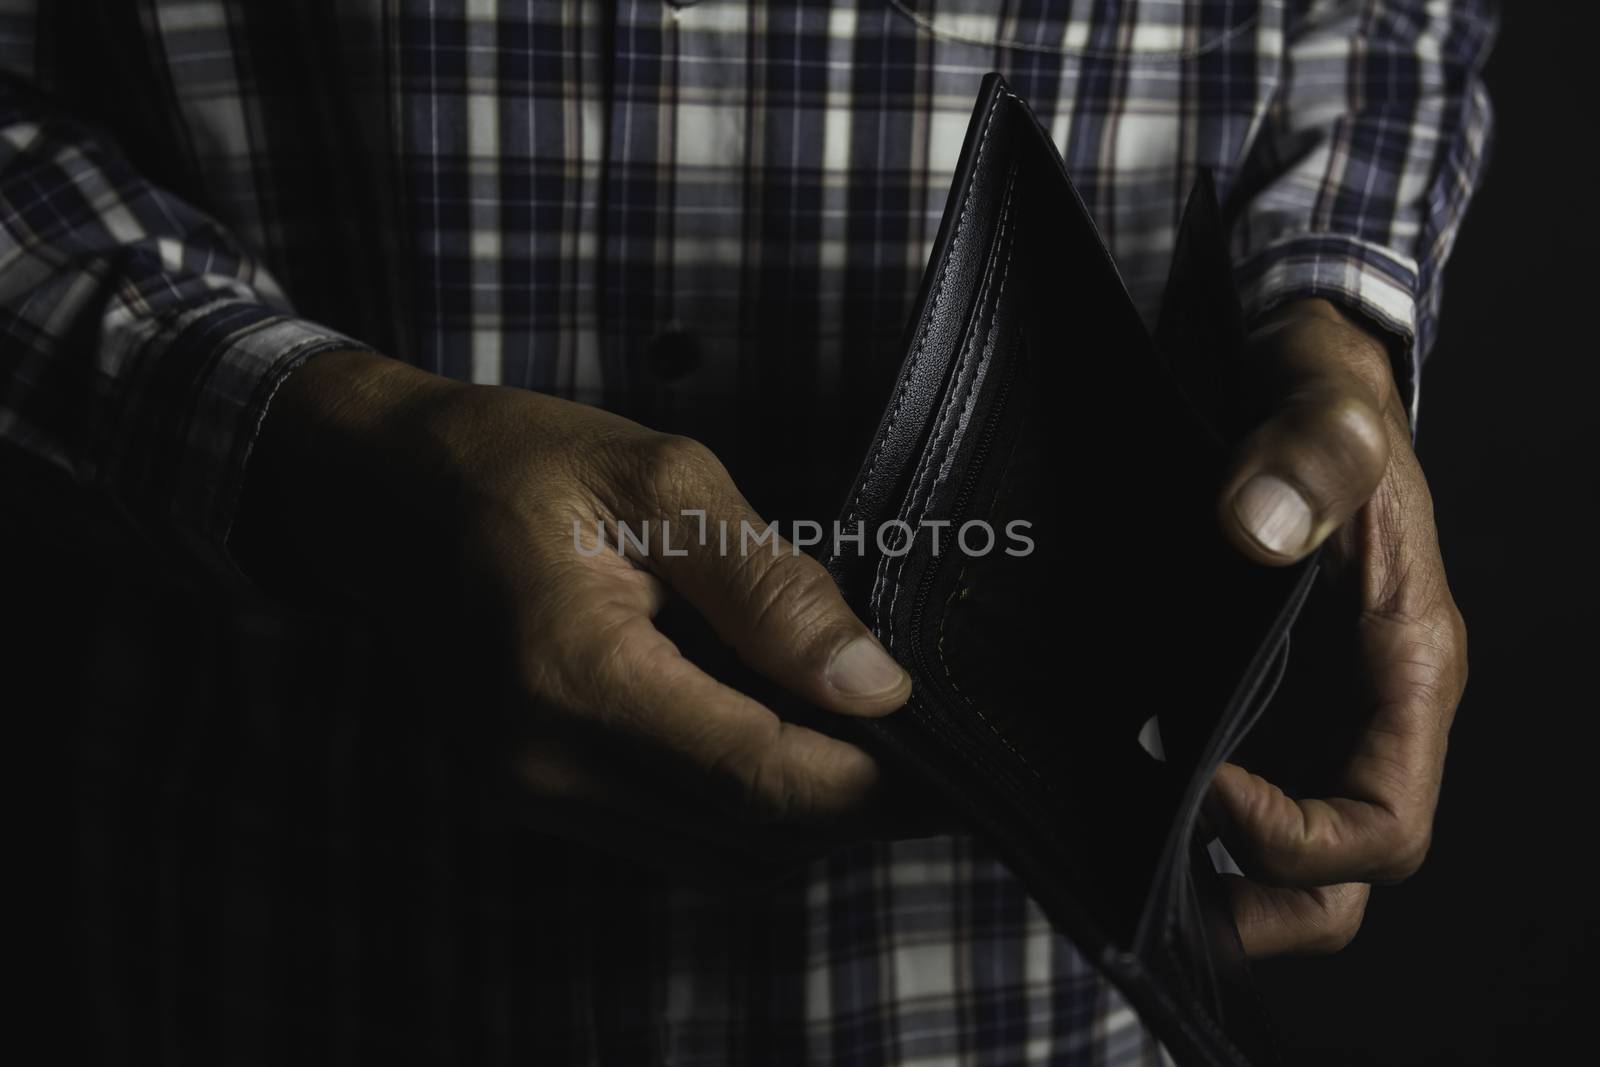 Close-up for a man standing and holding empty wallet. Wallet out of money.